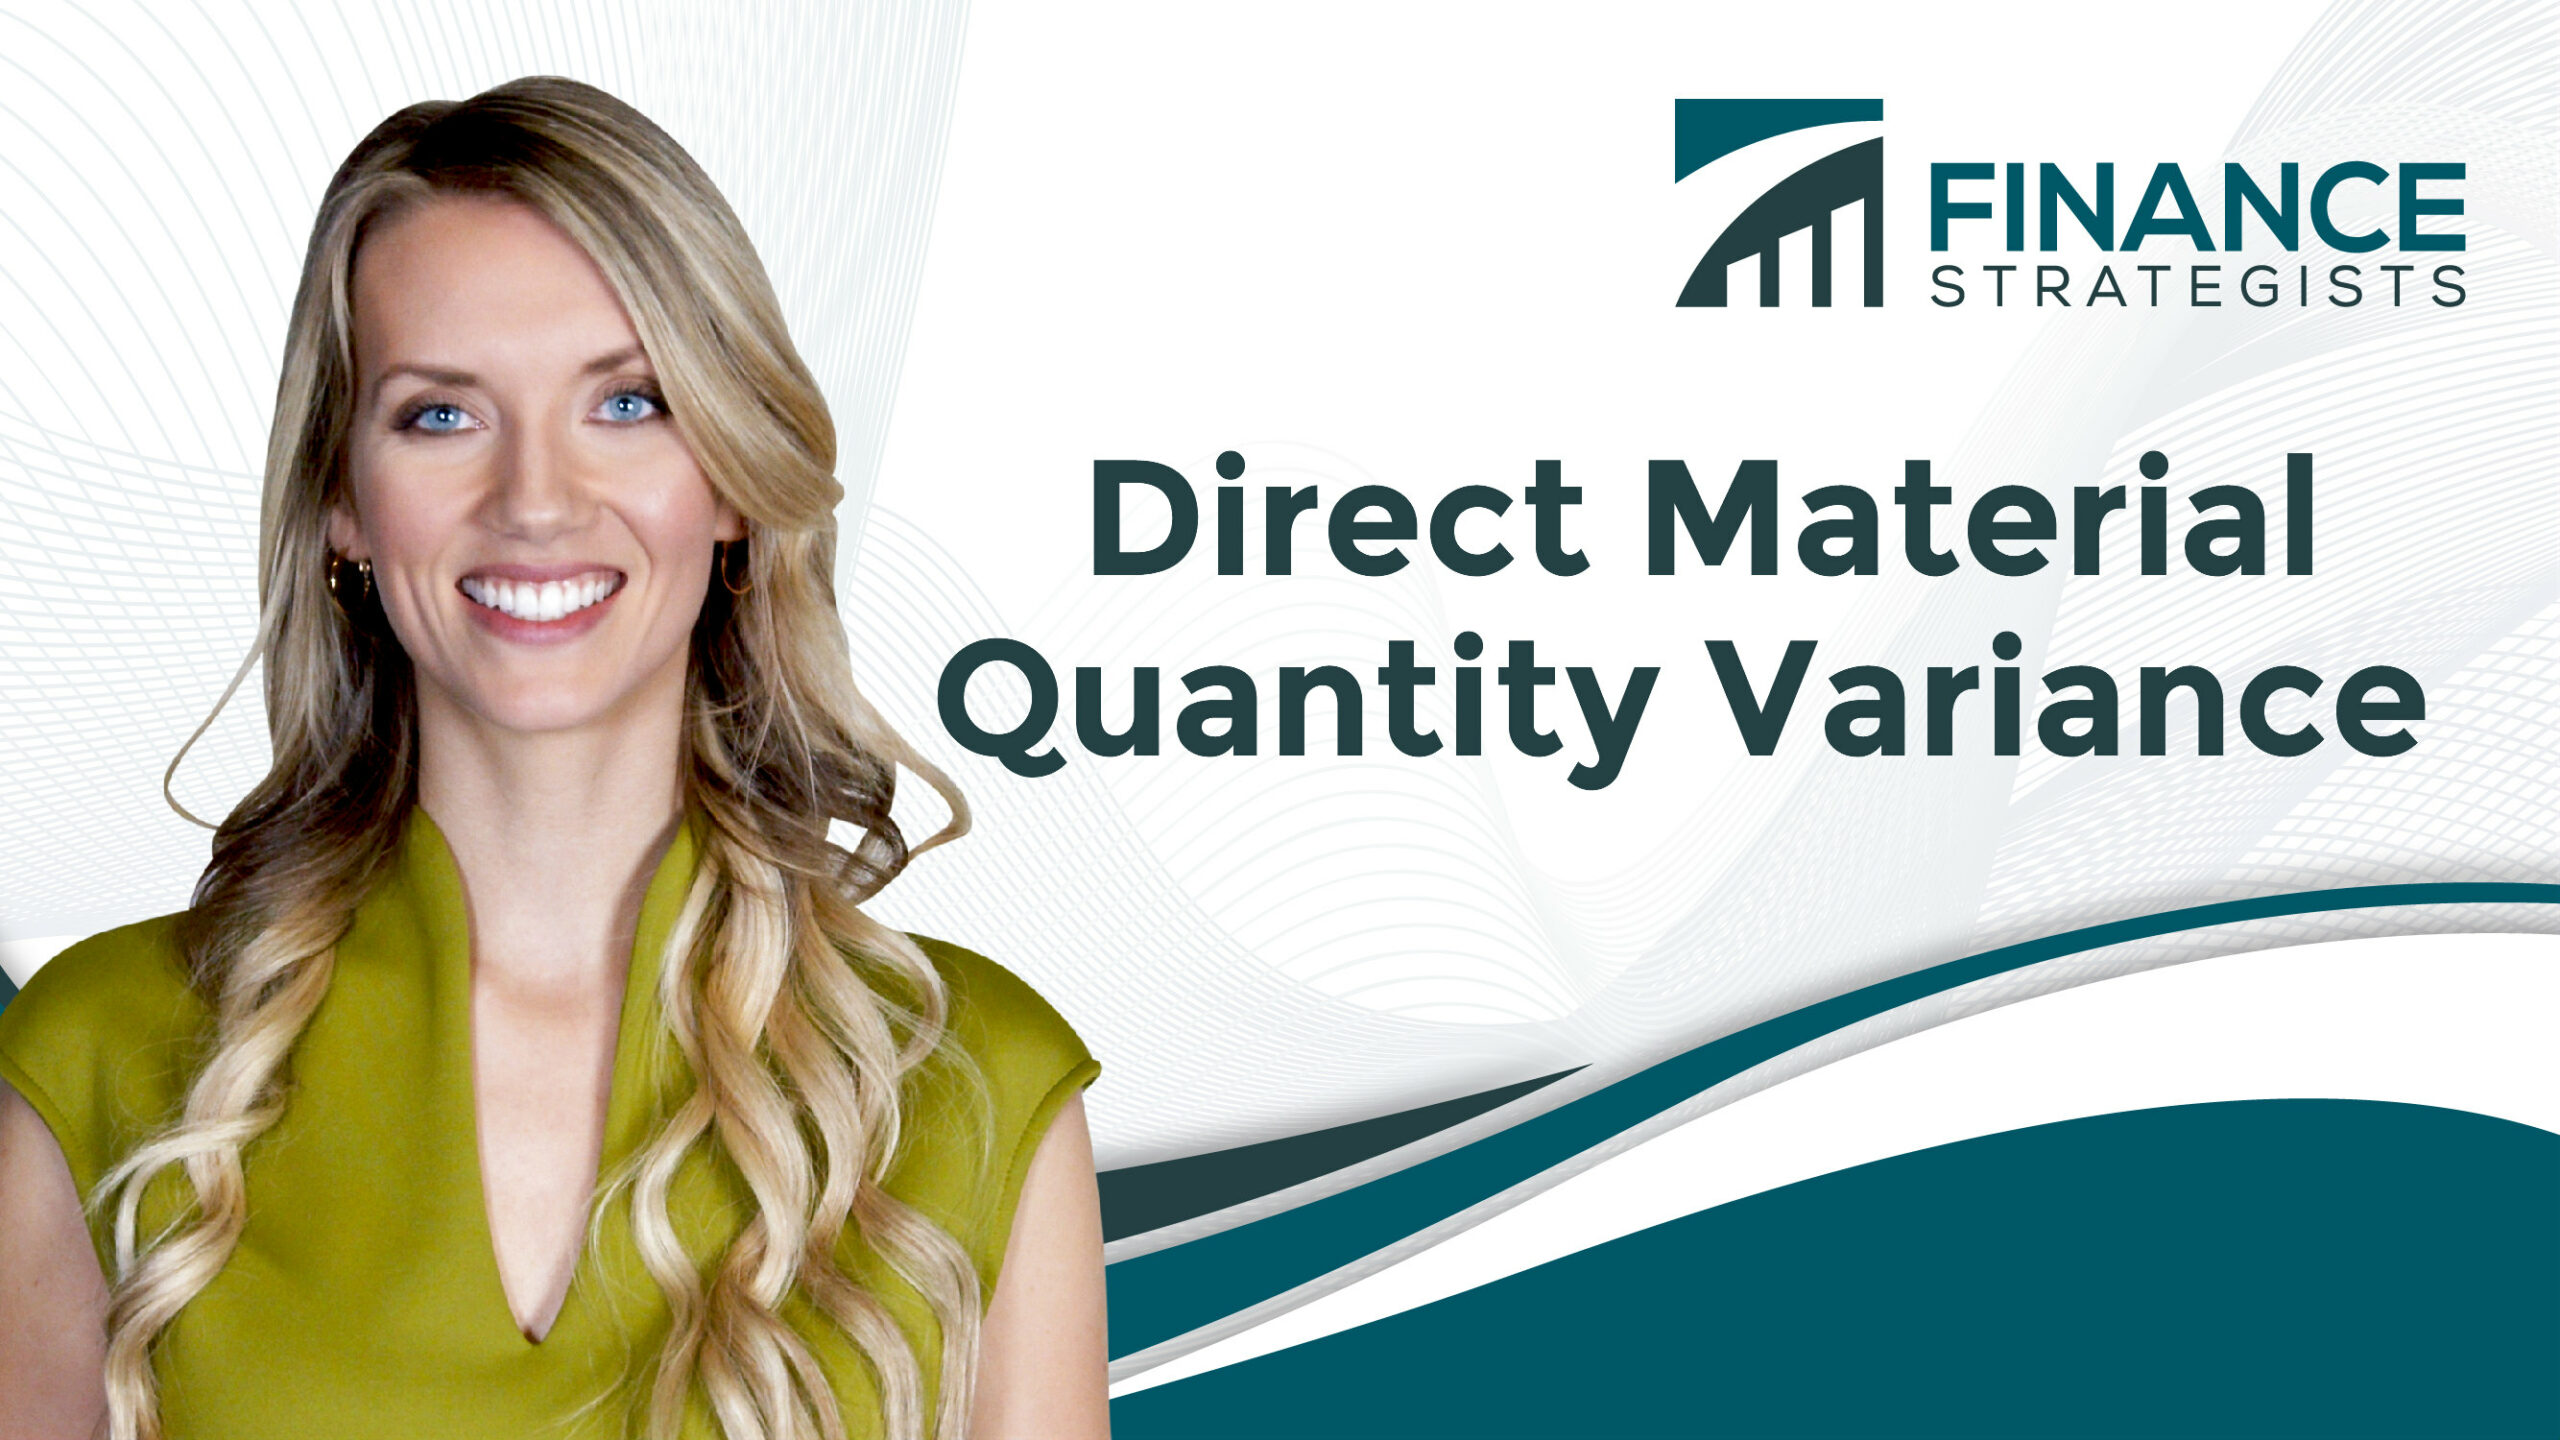 Direct Material (DM) Quantity Variance - Finance Strategists